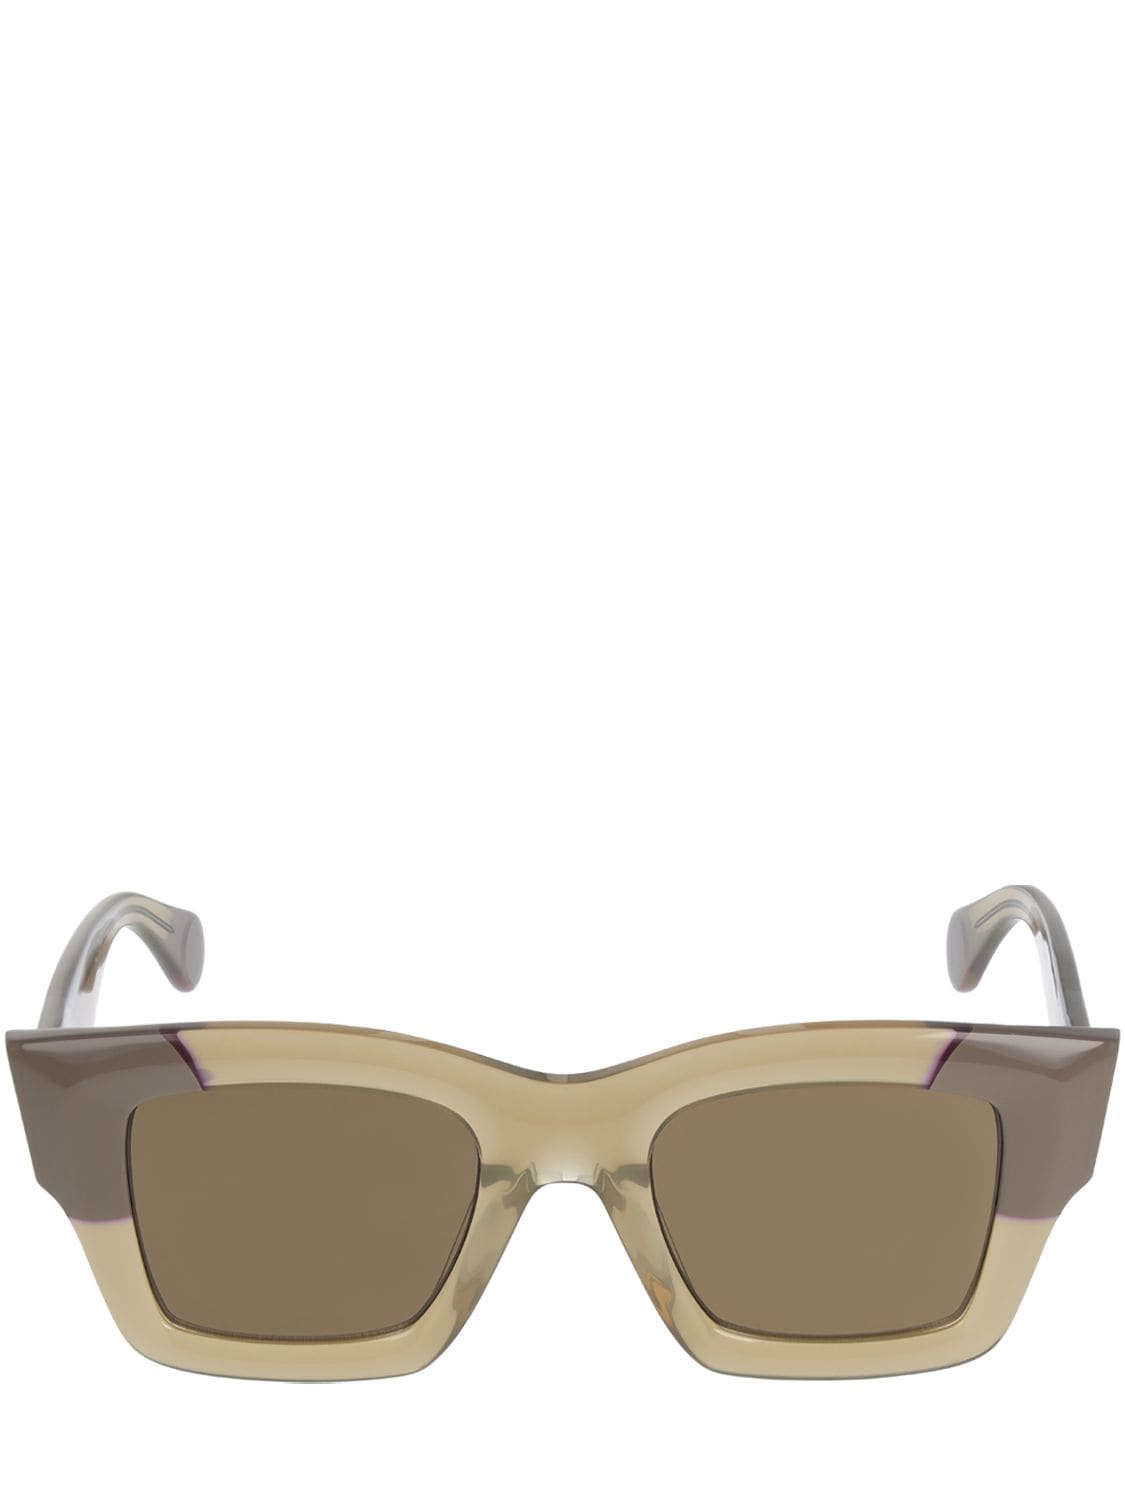 Jacquemus Les Lunettes Baci Sunglasses In Green